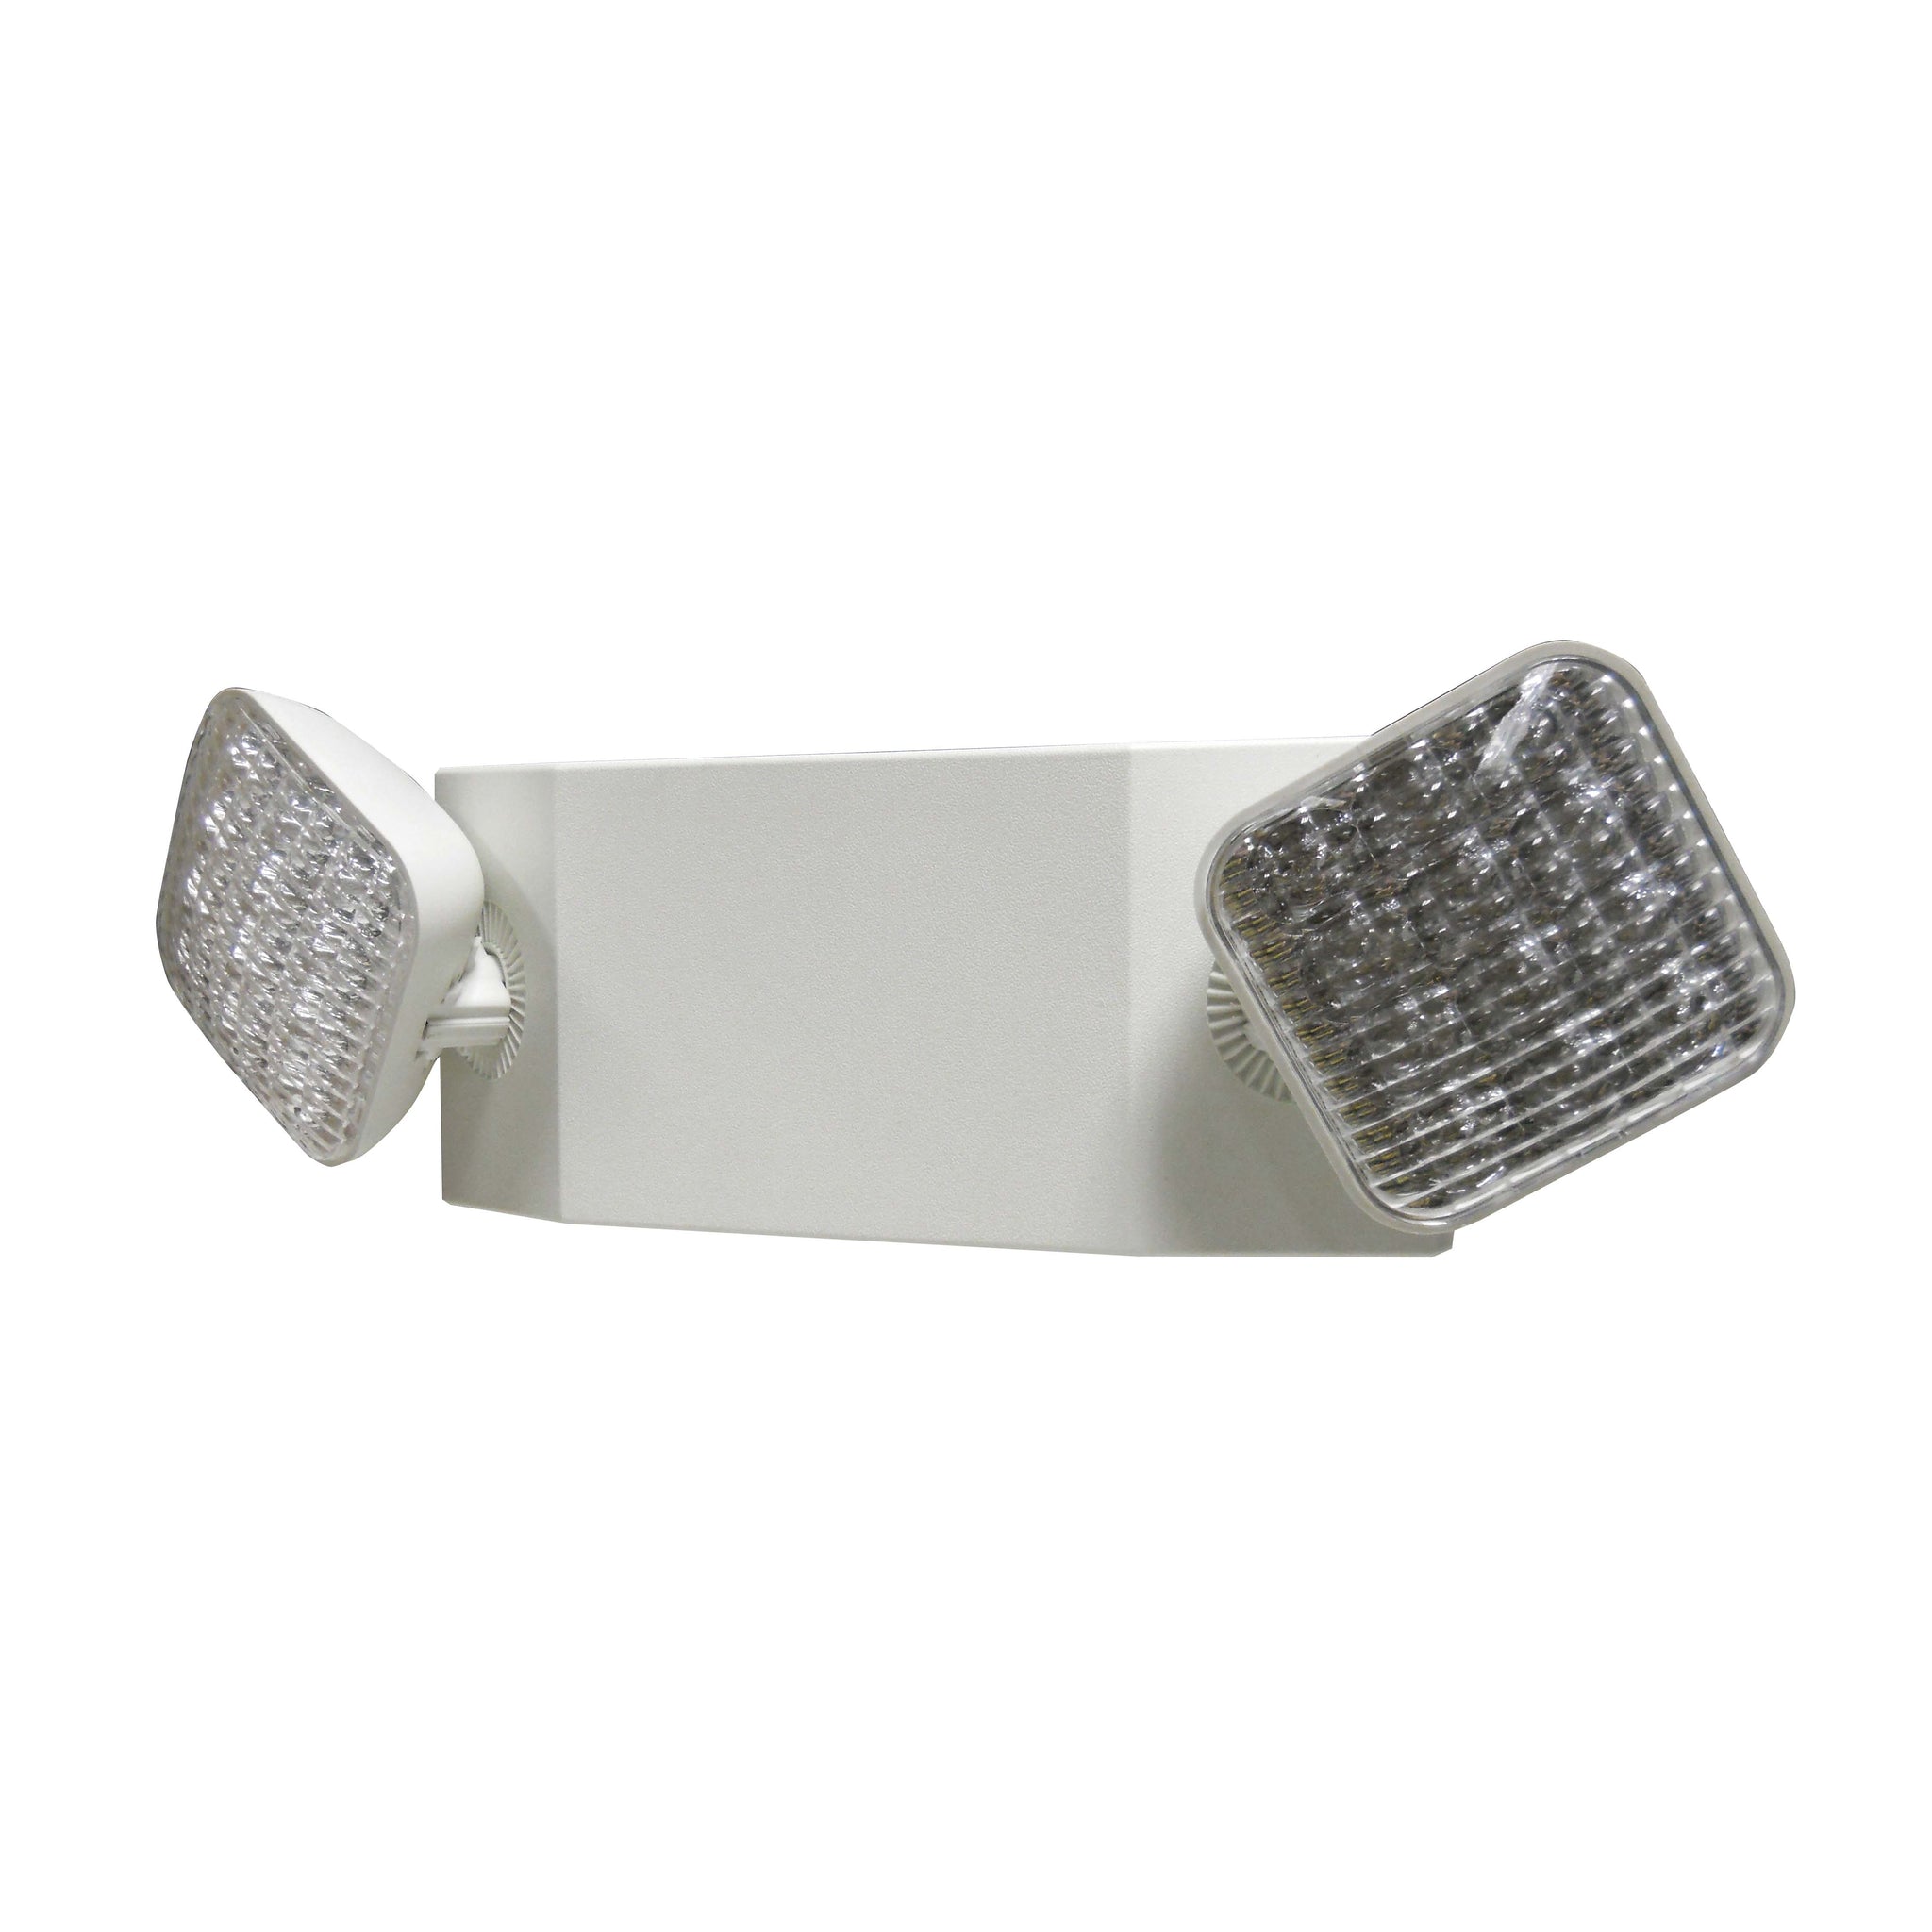 LED Thermoplastic Emergency Lights Adjustable Heads